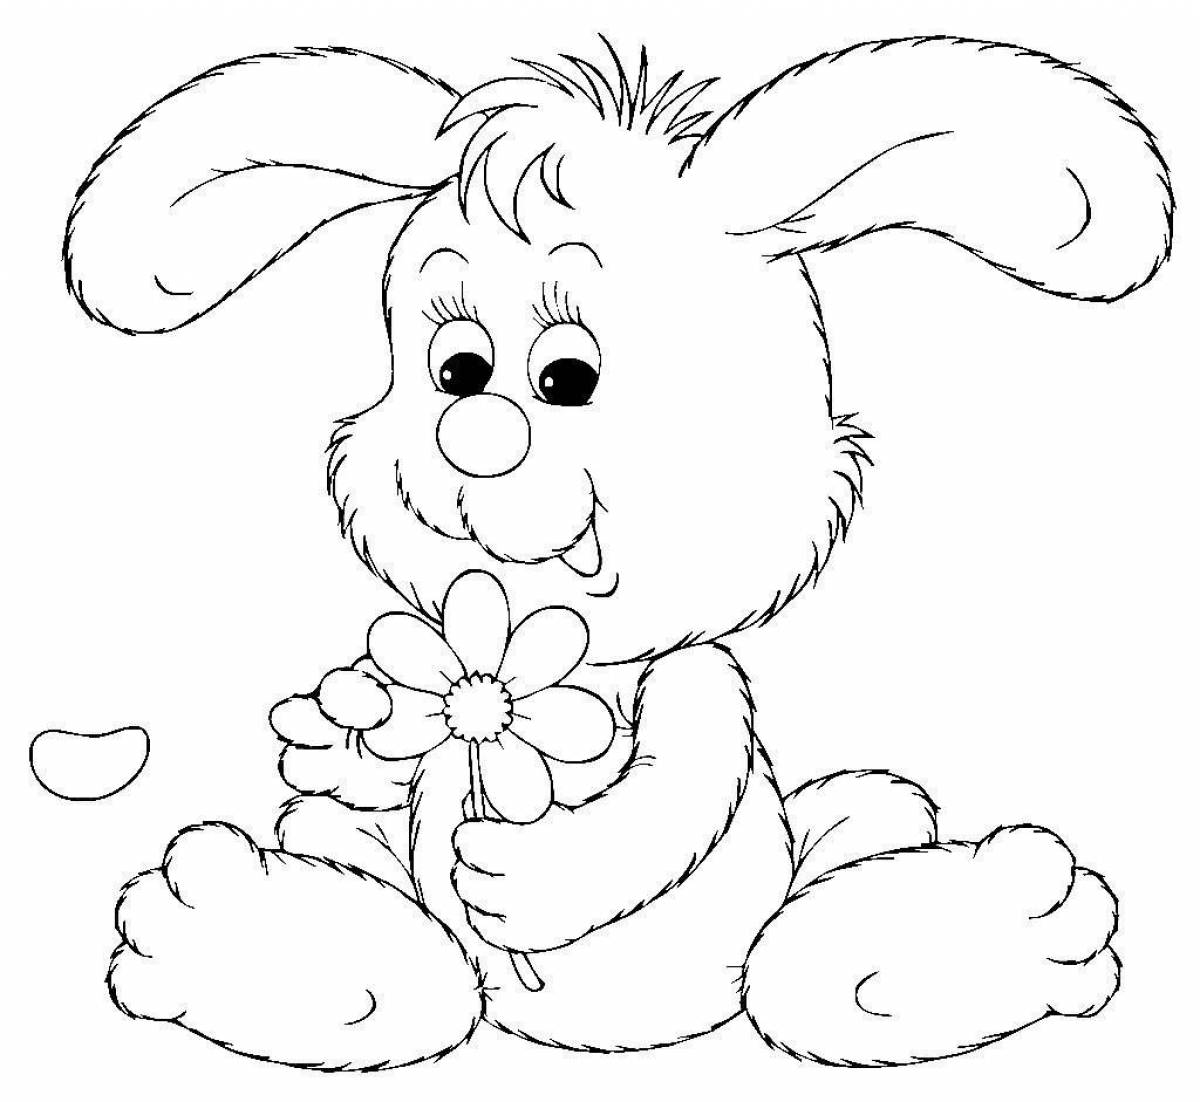 Coloring rabbit with floppy disk